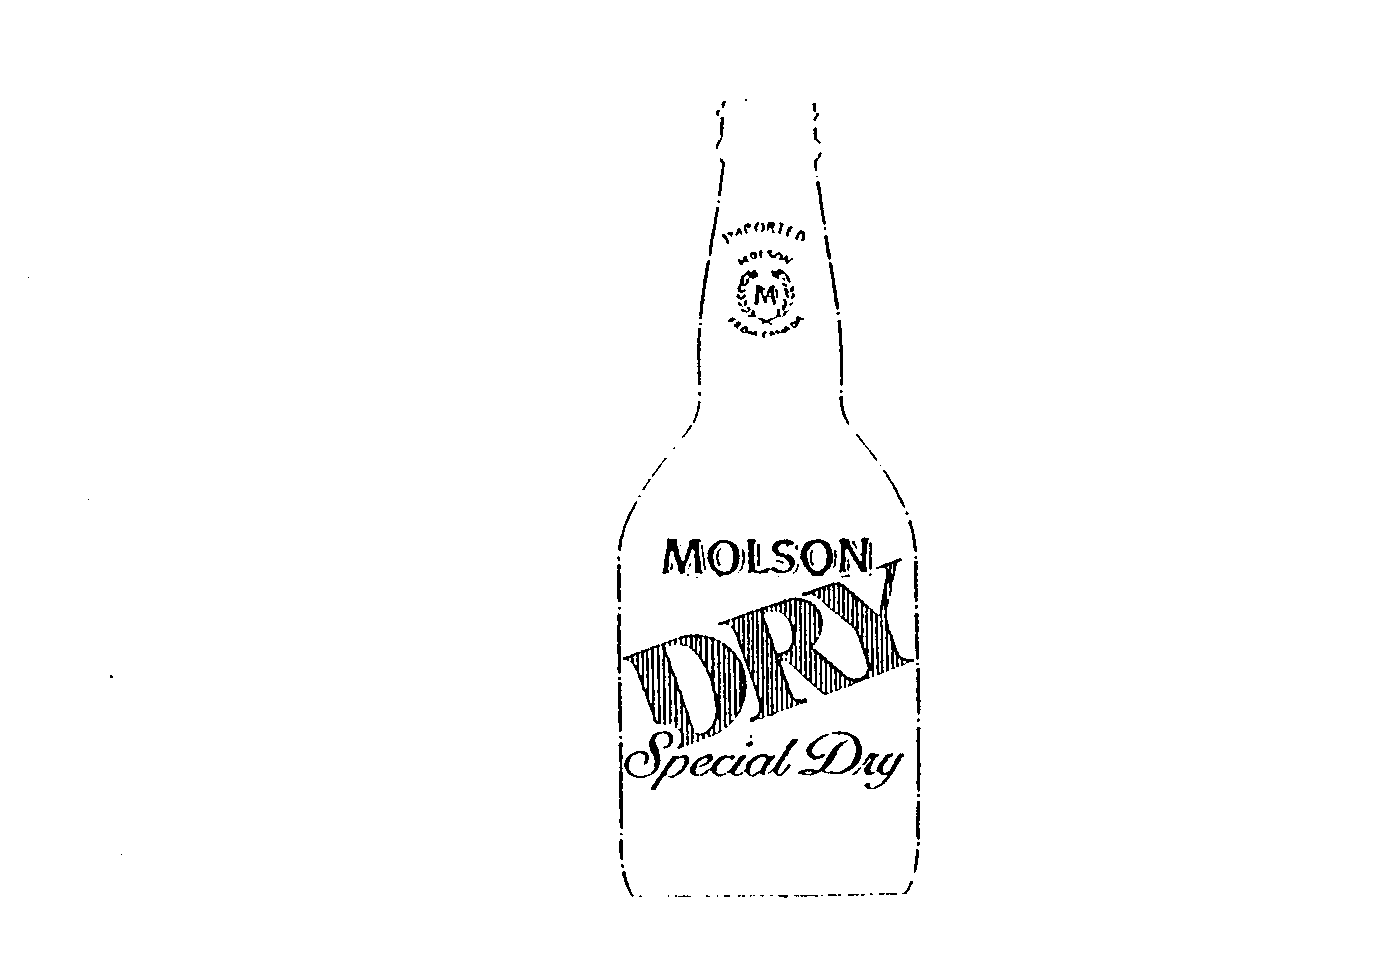  MOLSON DRY SPECIAL DRY IMPORTED MOLSON FROM CANADA